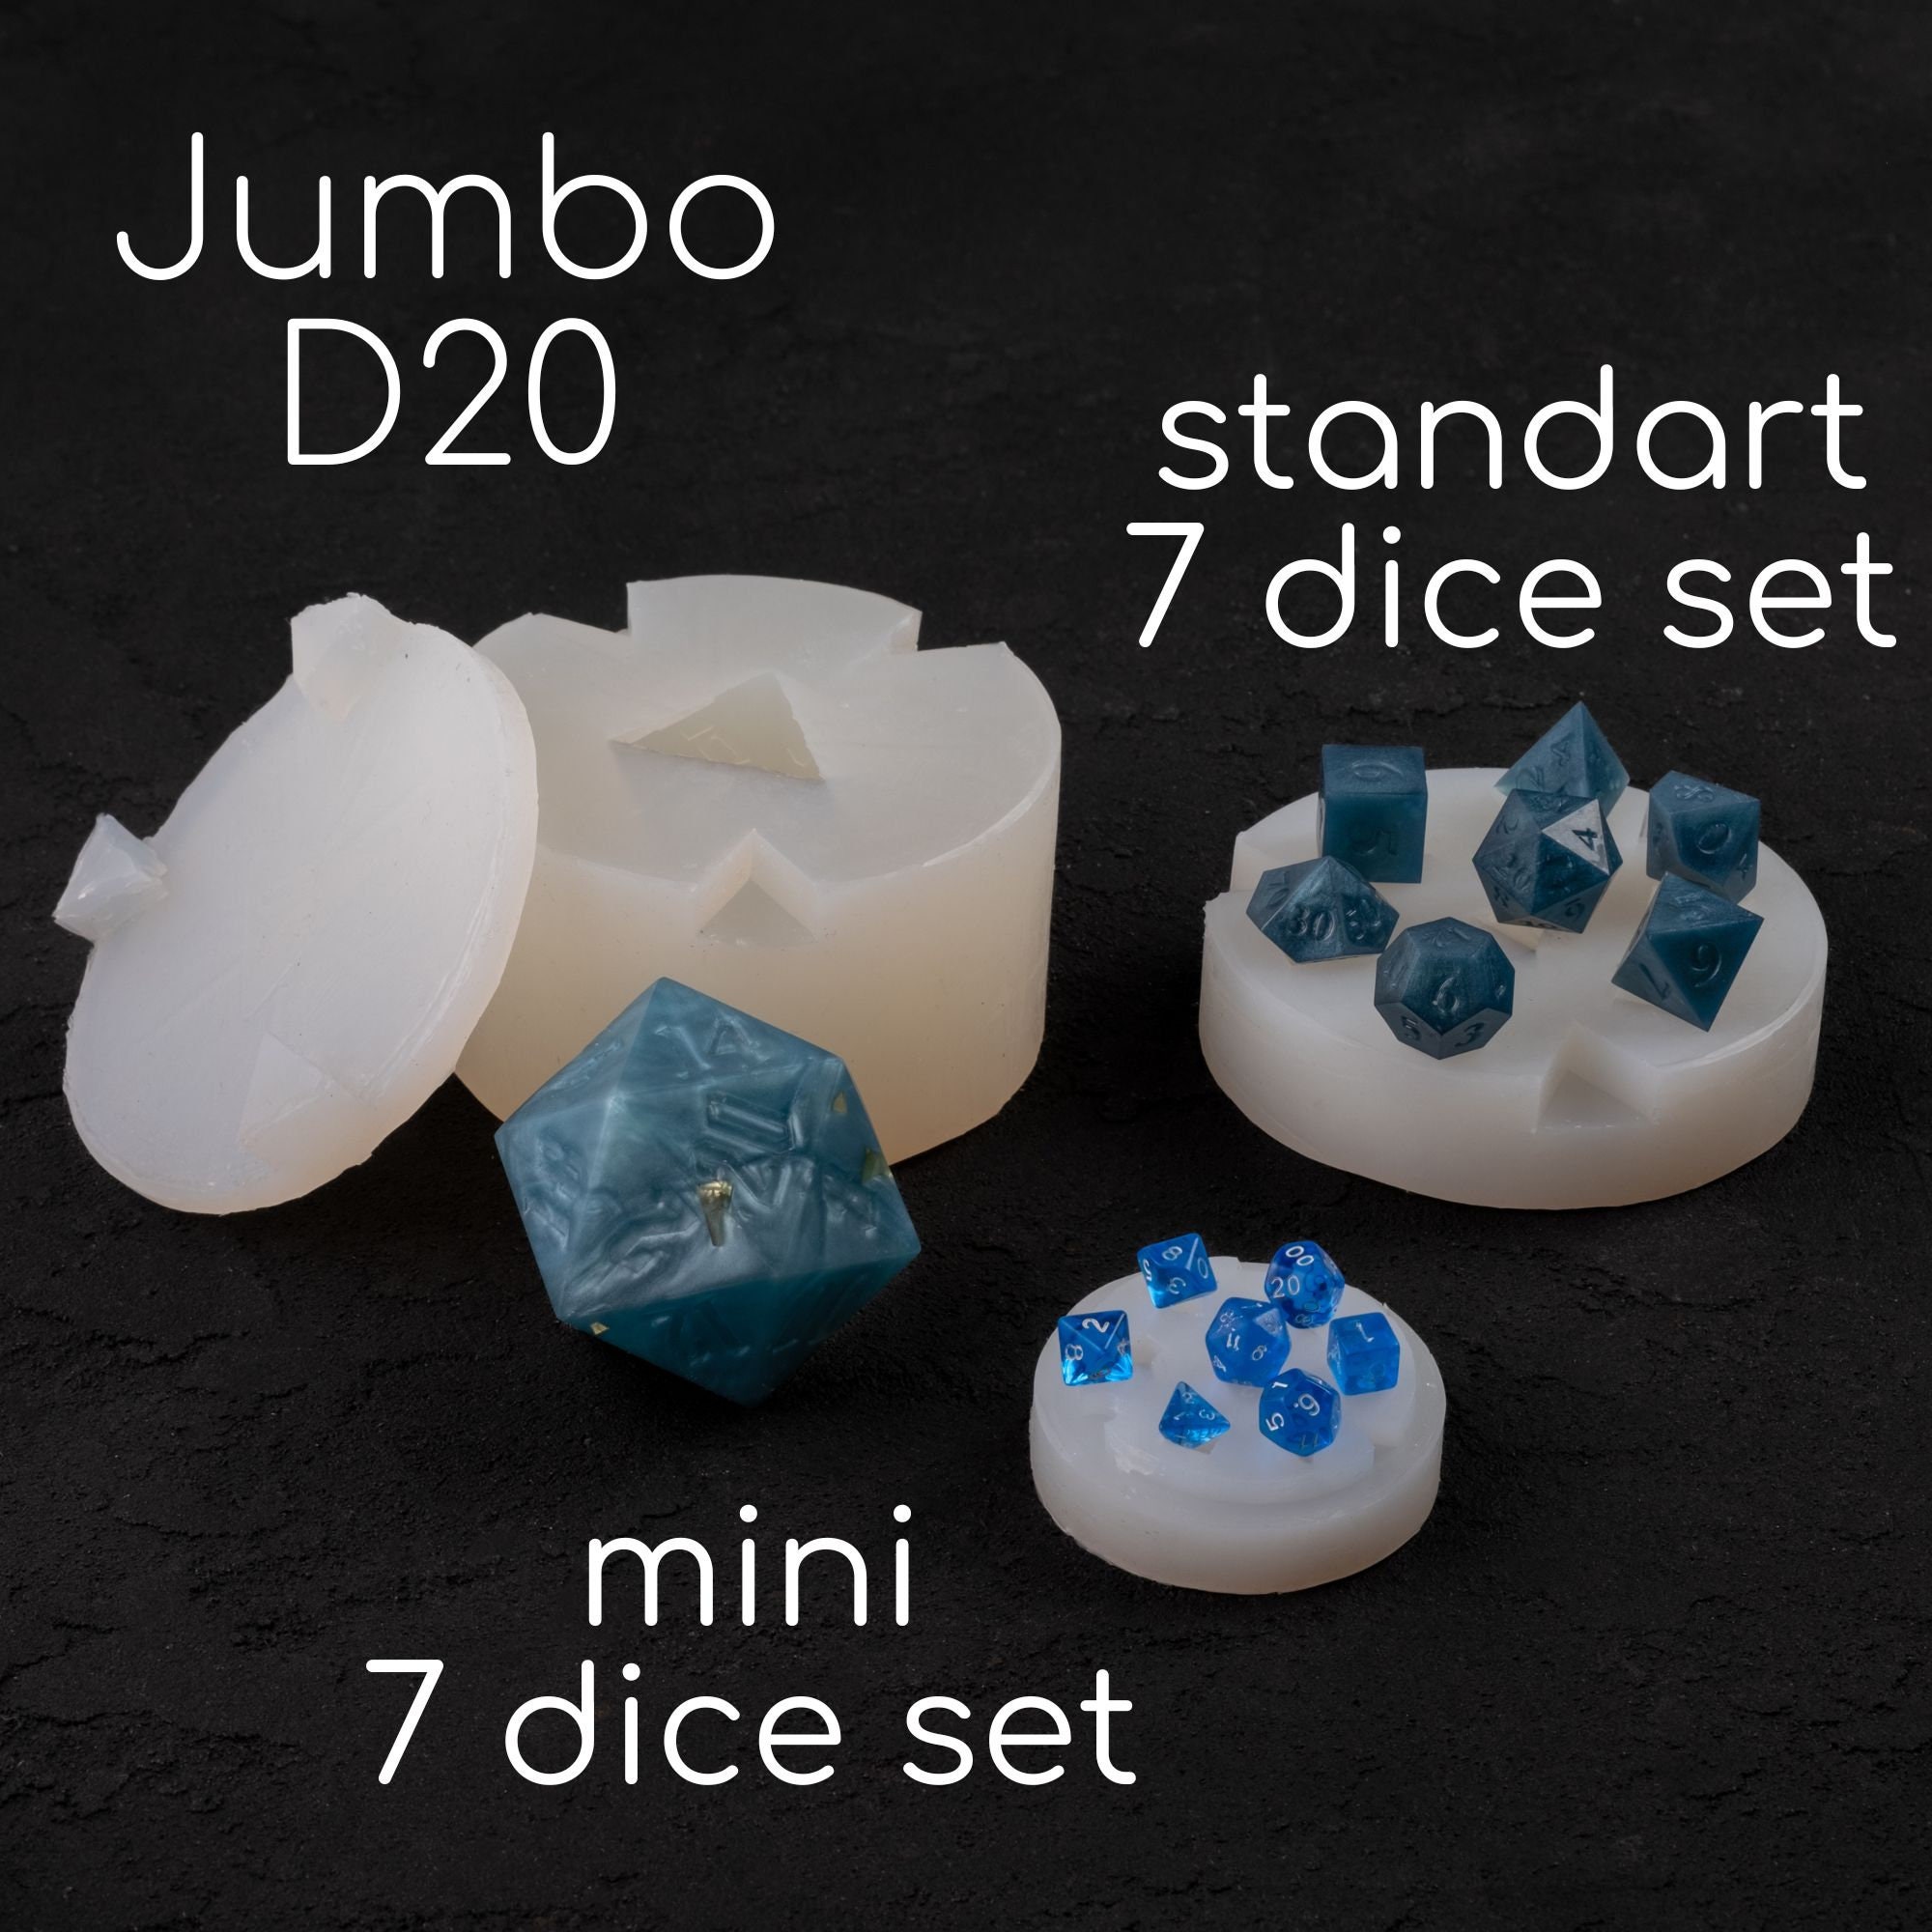 d12 Dice Silicone Mold | Dodecahedron Polyhedral Dice Mould | Gamer Dice  Making | Resin Craft Supplies (30mm x 27mm)